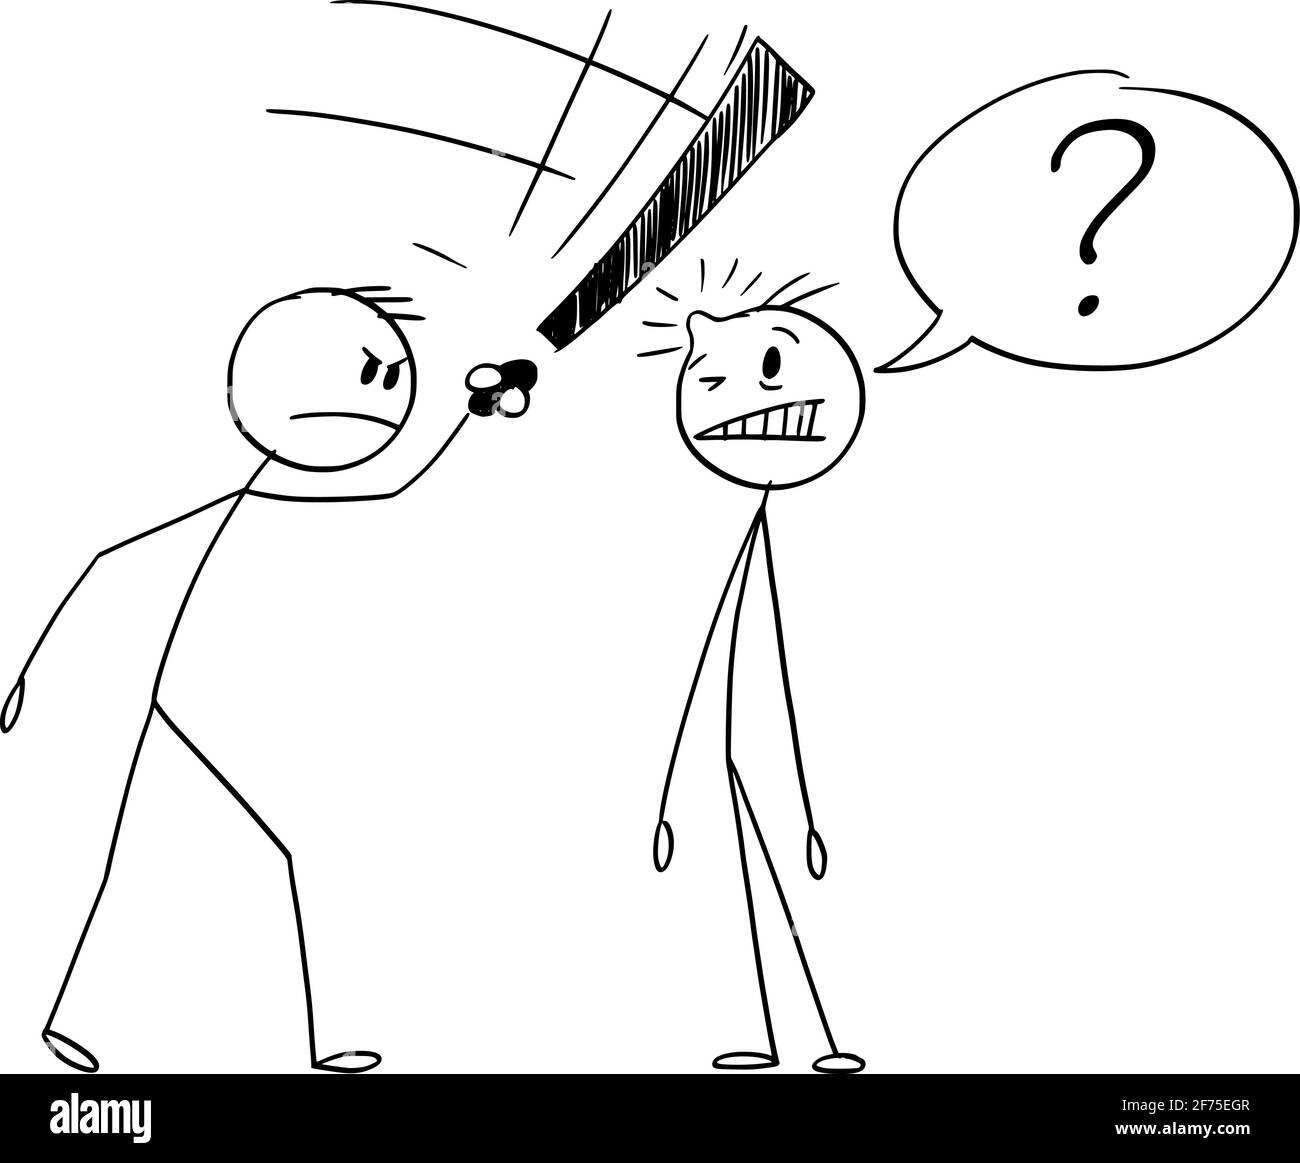 Man Asking Question, Another Man Beating Him by Exclamation Mark, Vector Cartoon Stick Figure Illustration Stock Vector